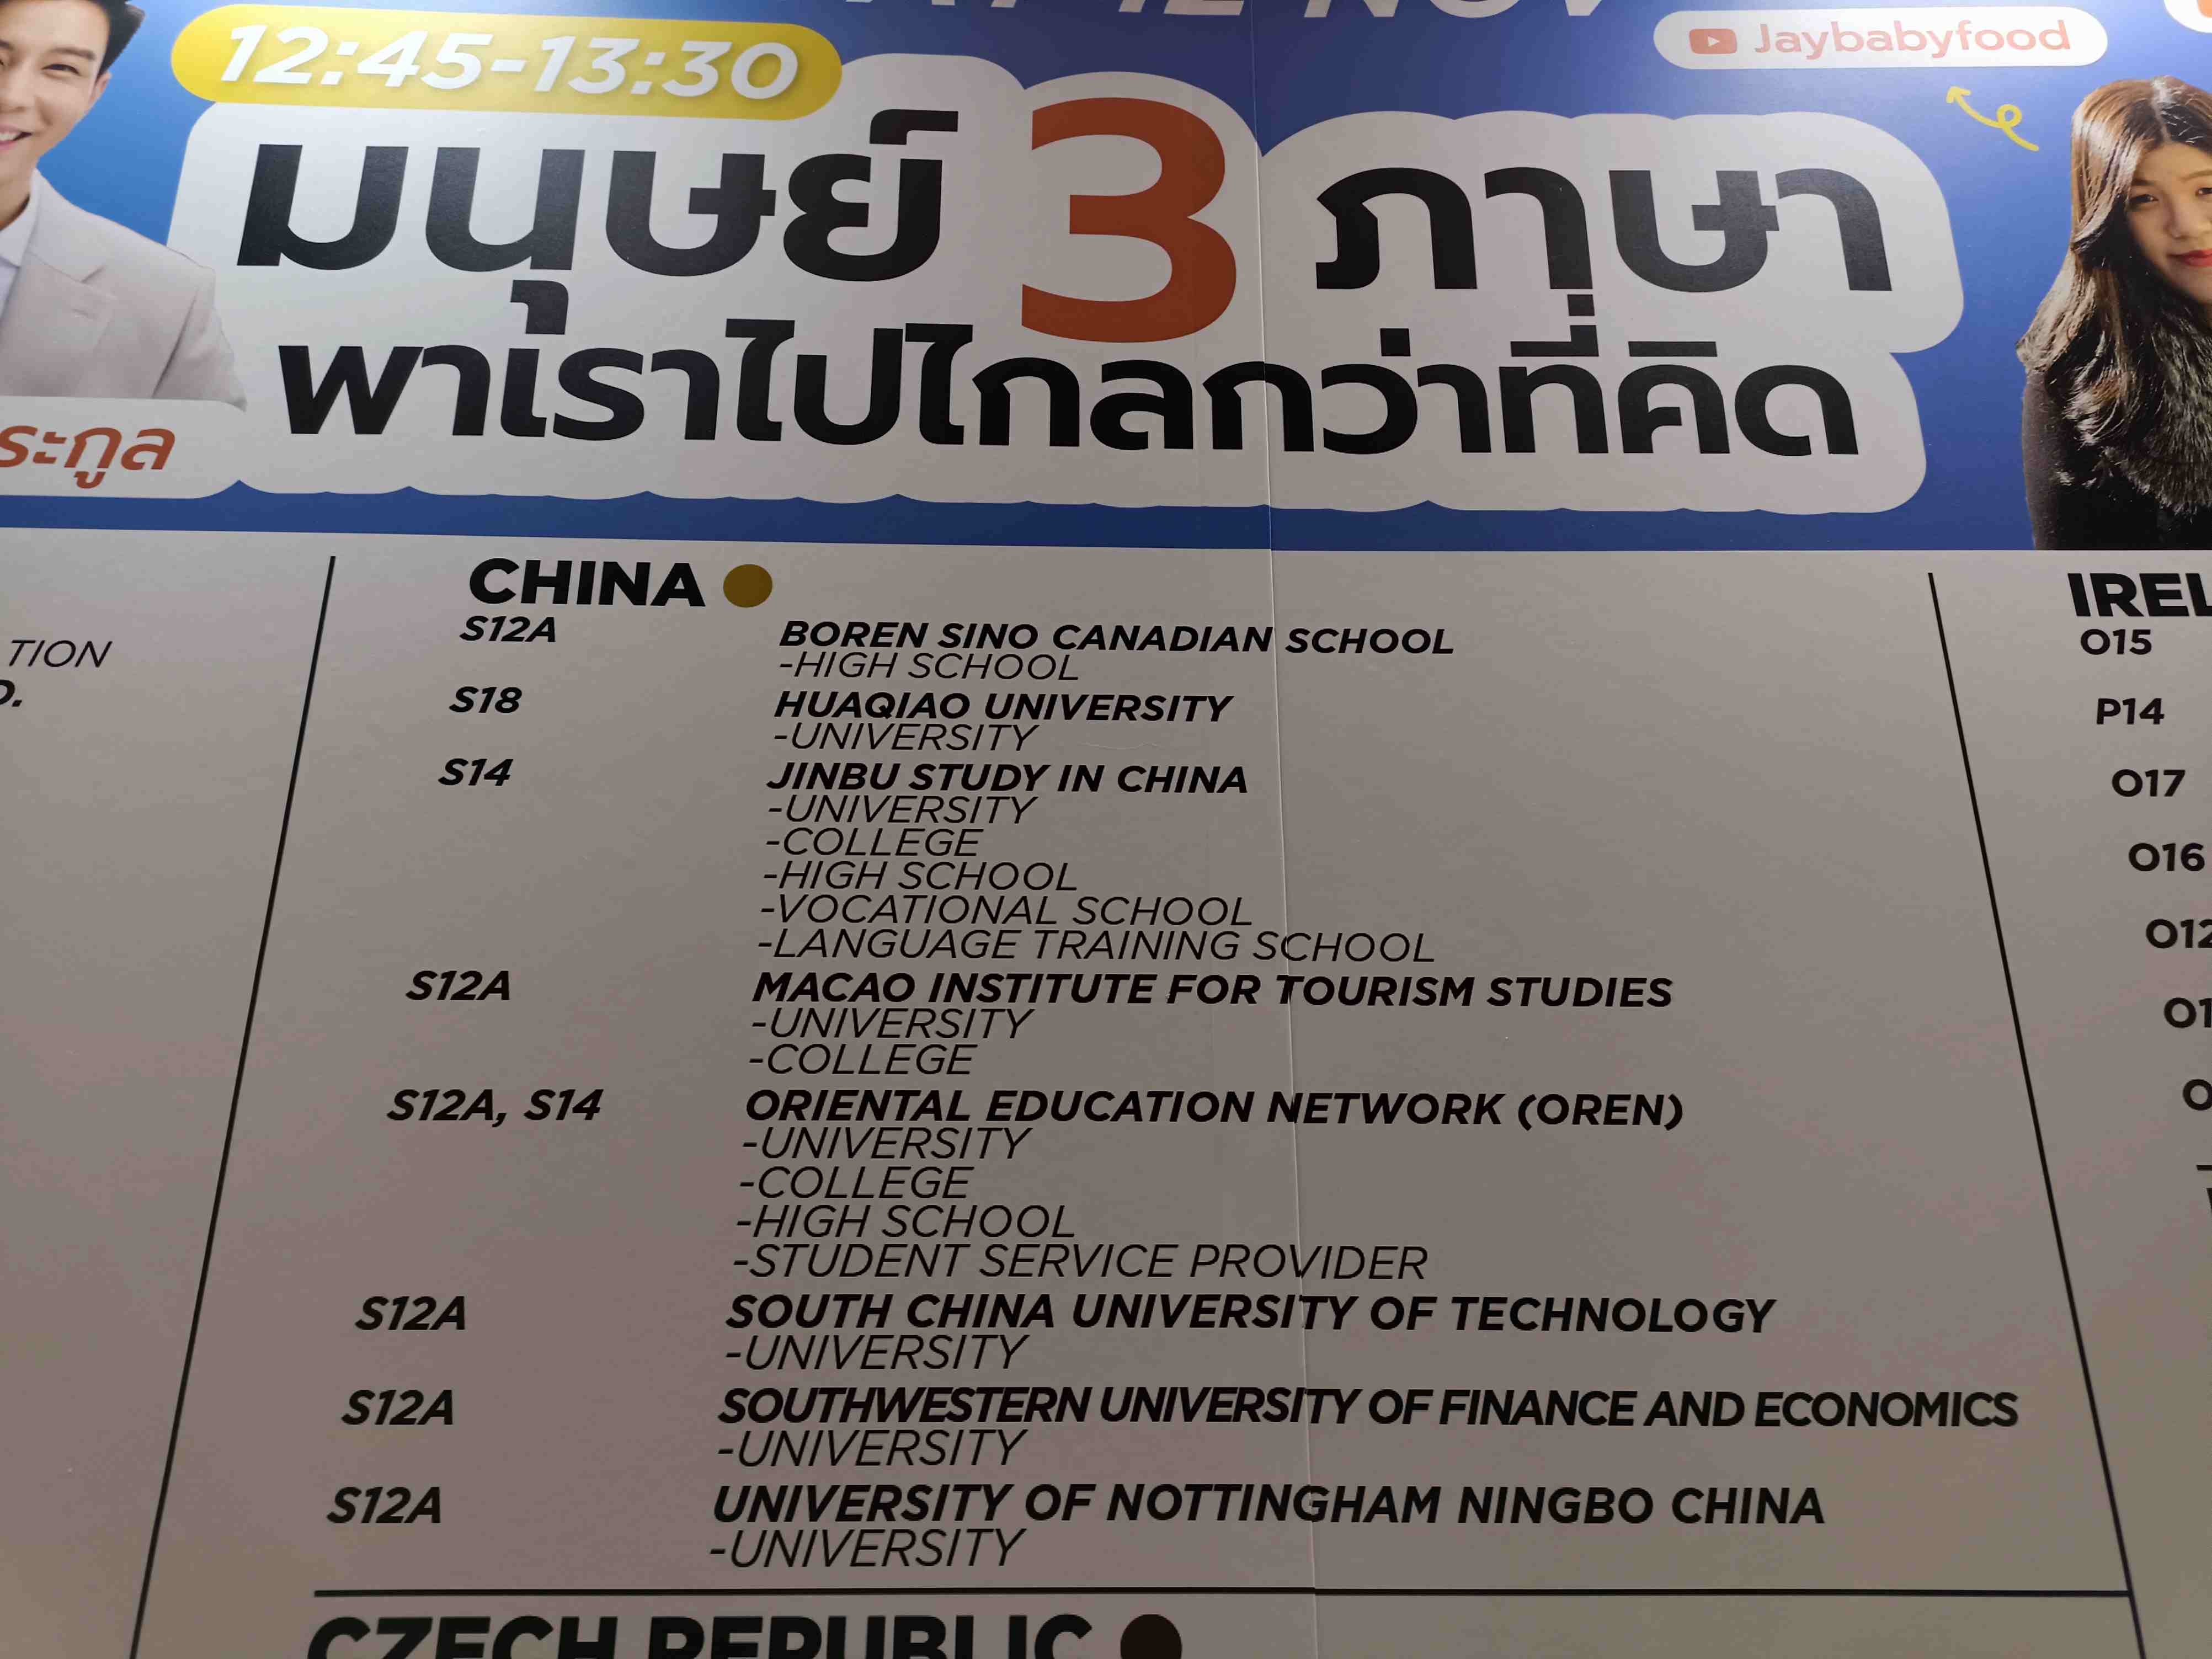 Five Universities to join